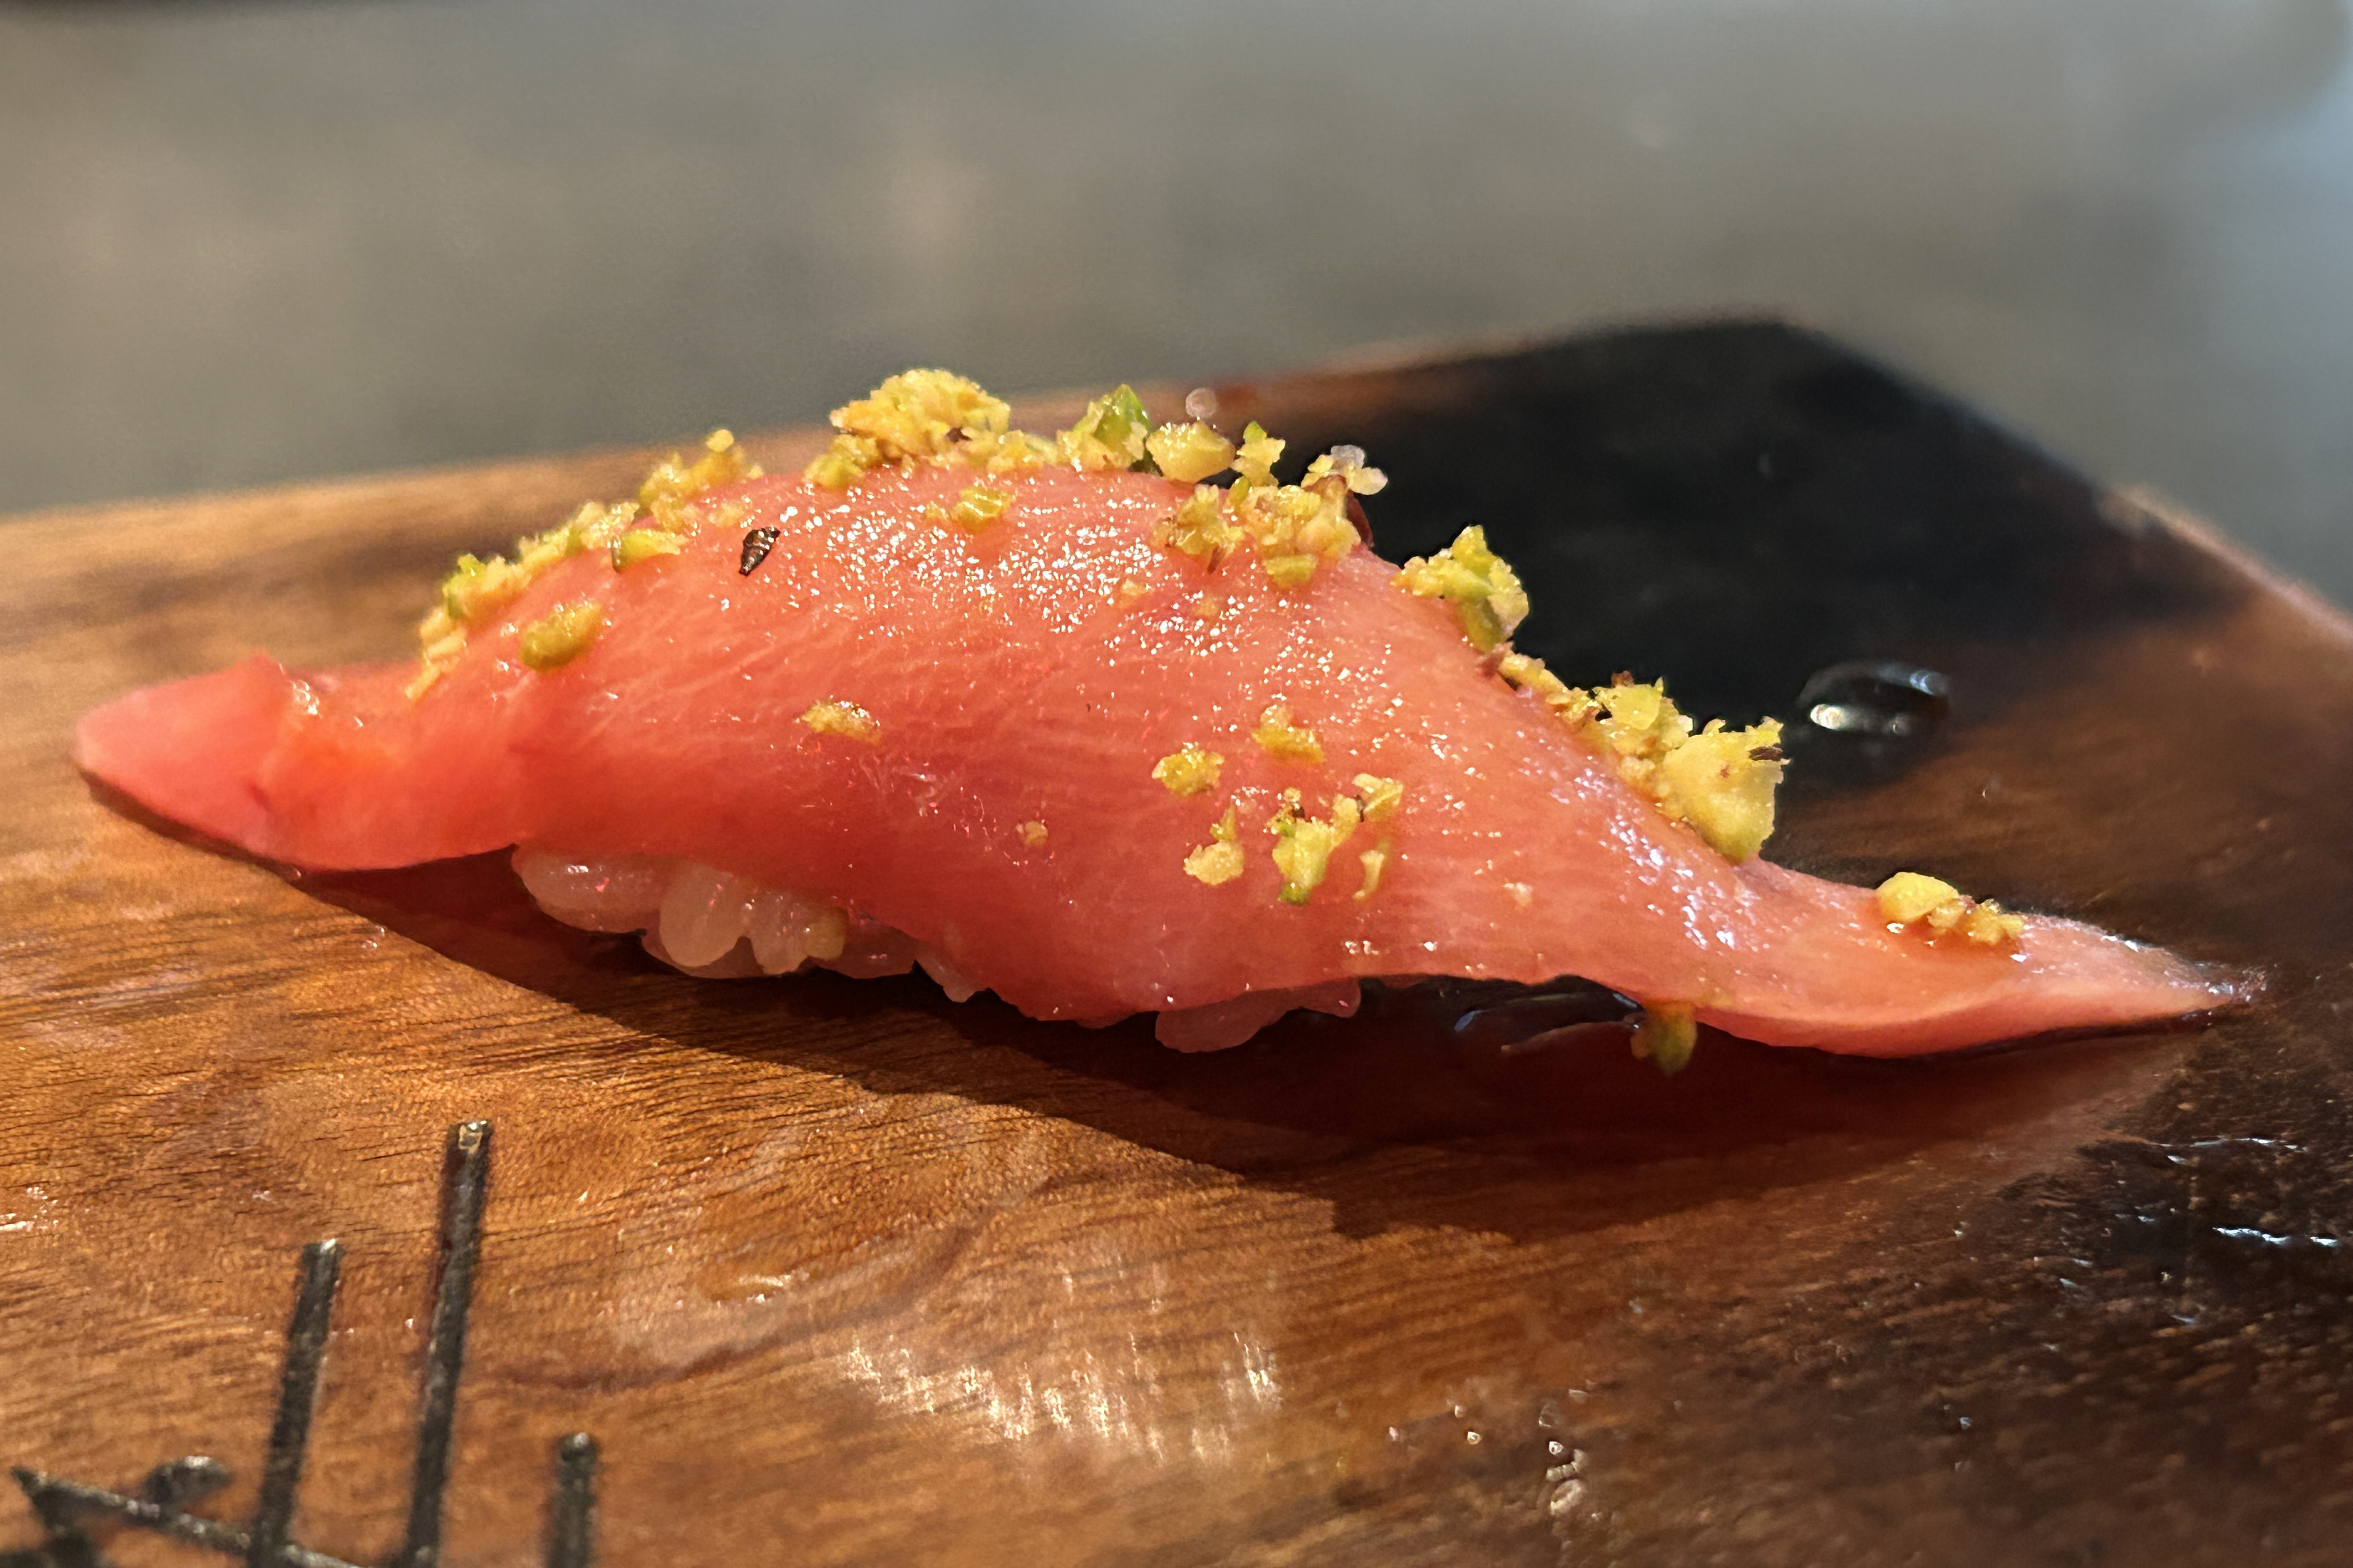 A piece of sushi with a slice of raw fish, likely tuna, is placed on a wooden surface, garnished with yellowish seasoning.